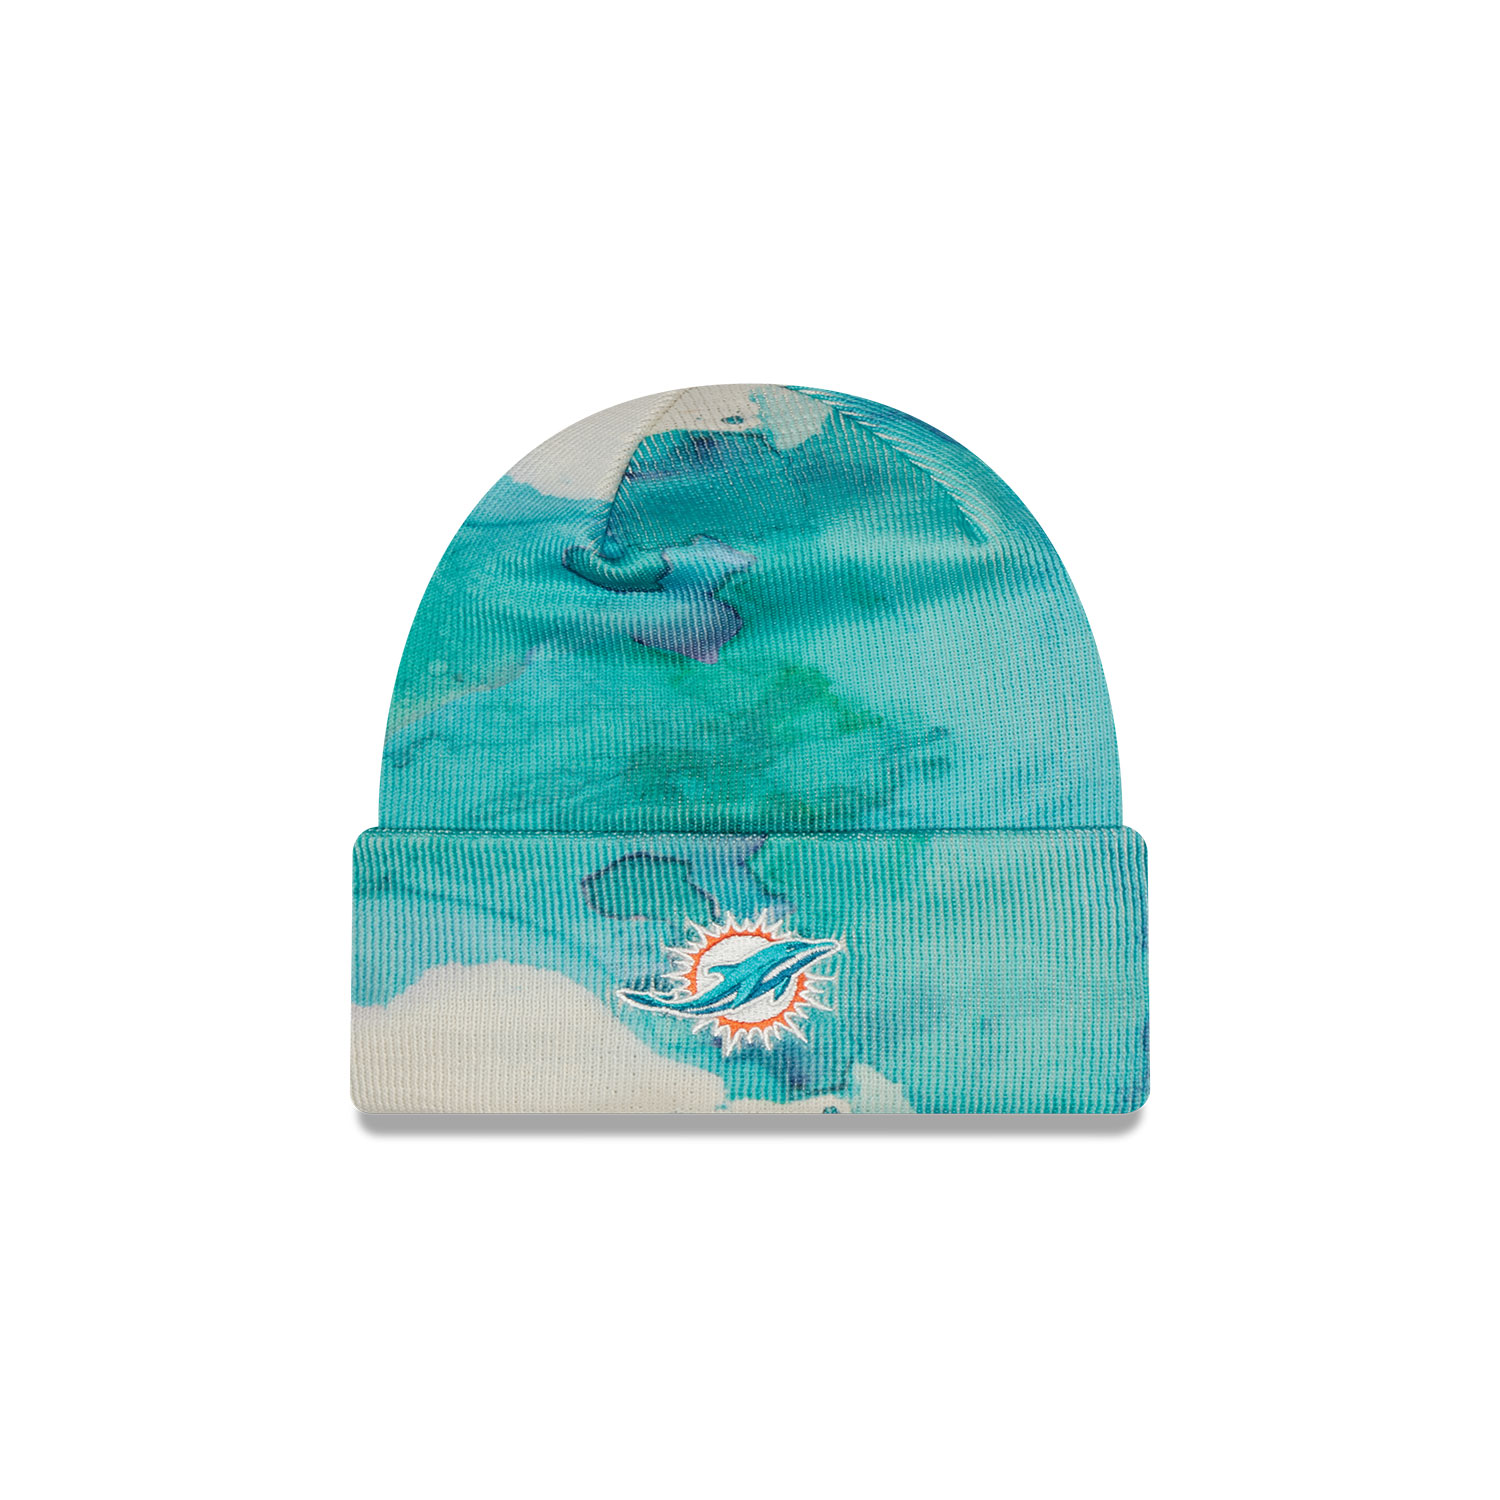 Miami Dolphins NFL Sideline Teal Beanie Hat